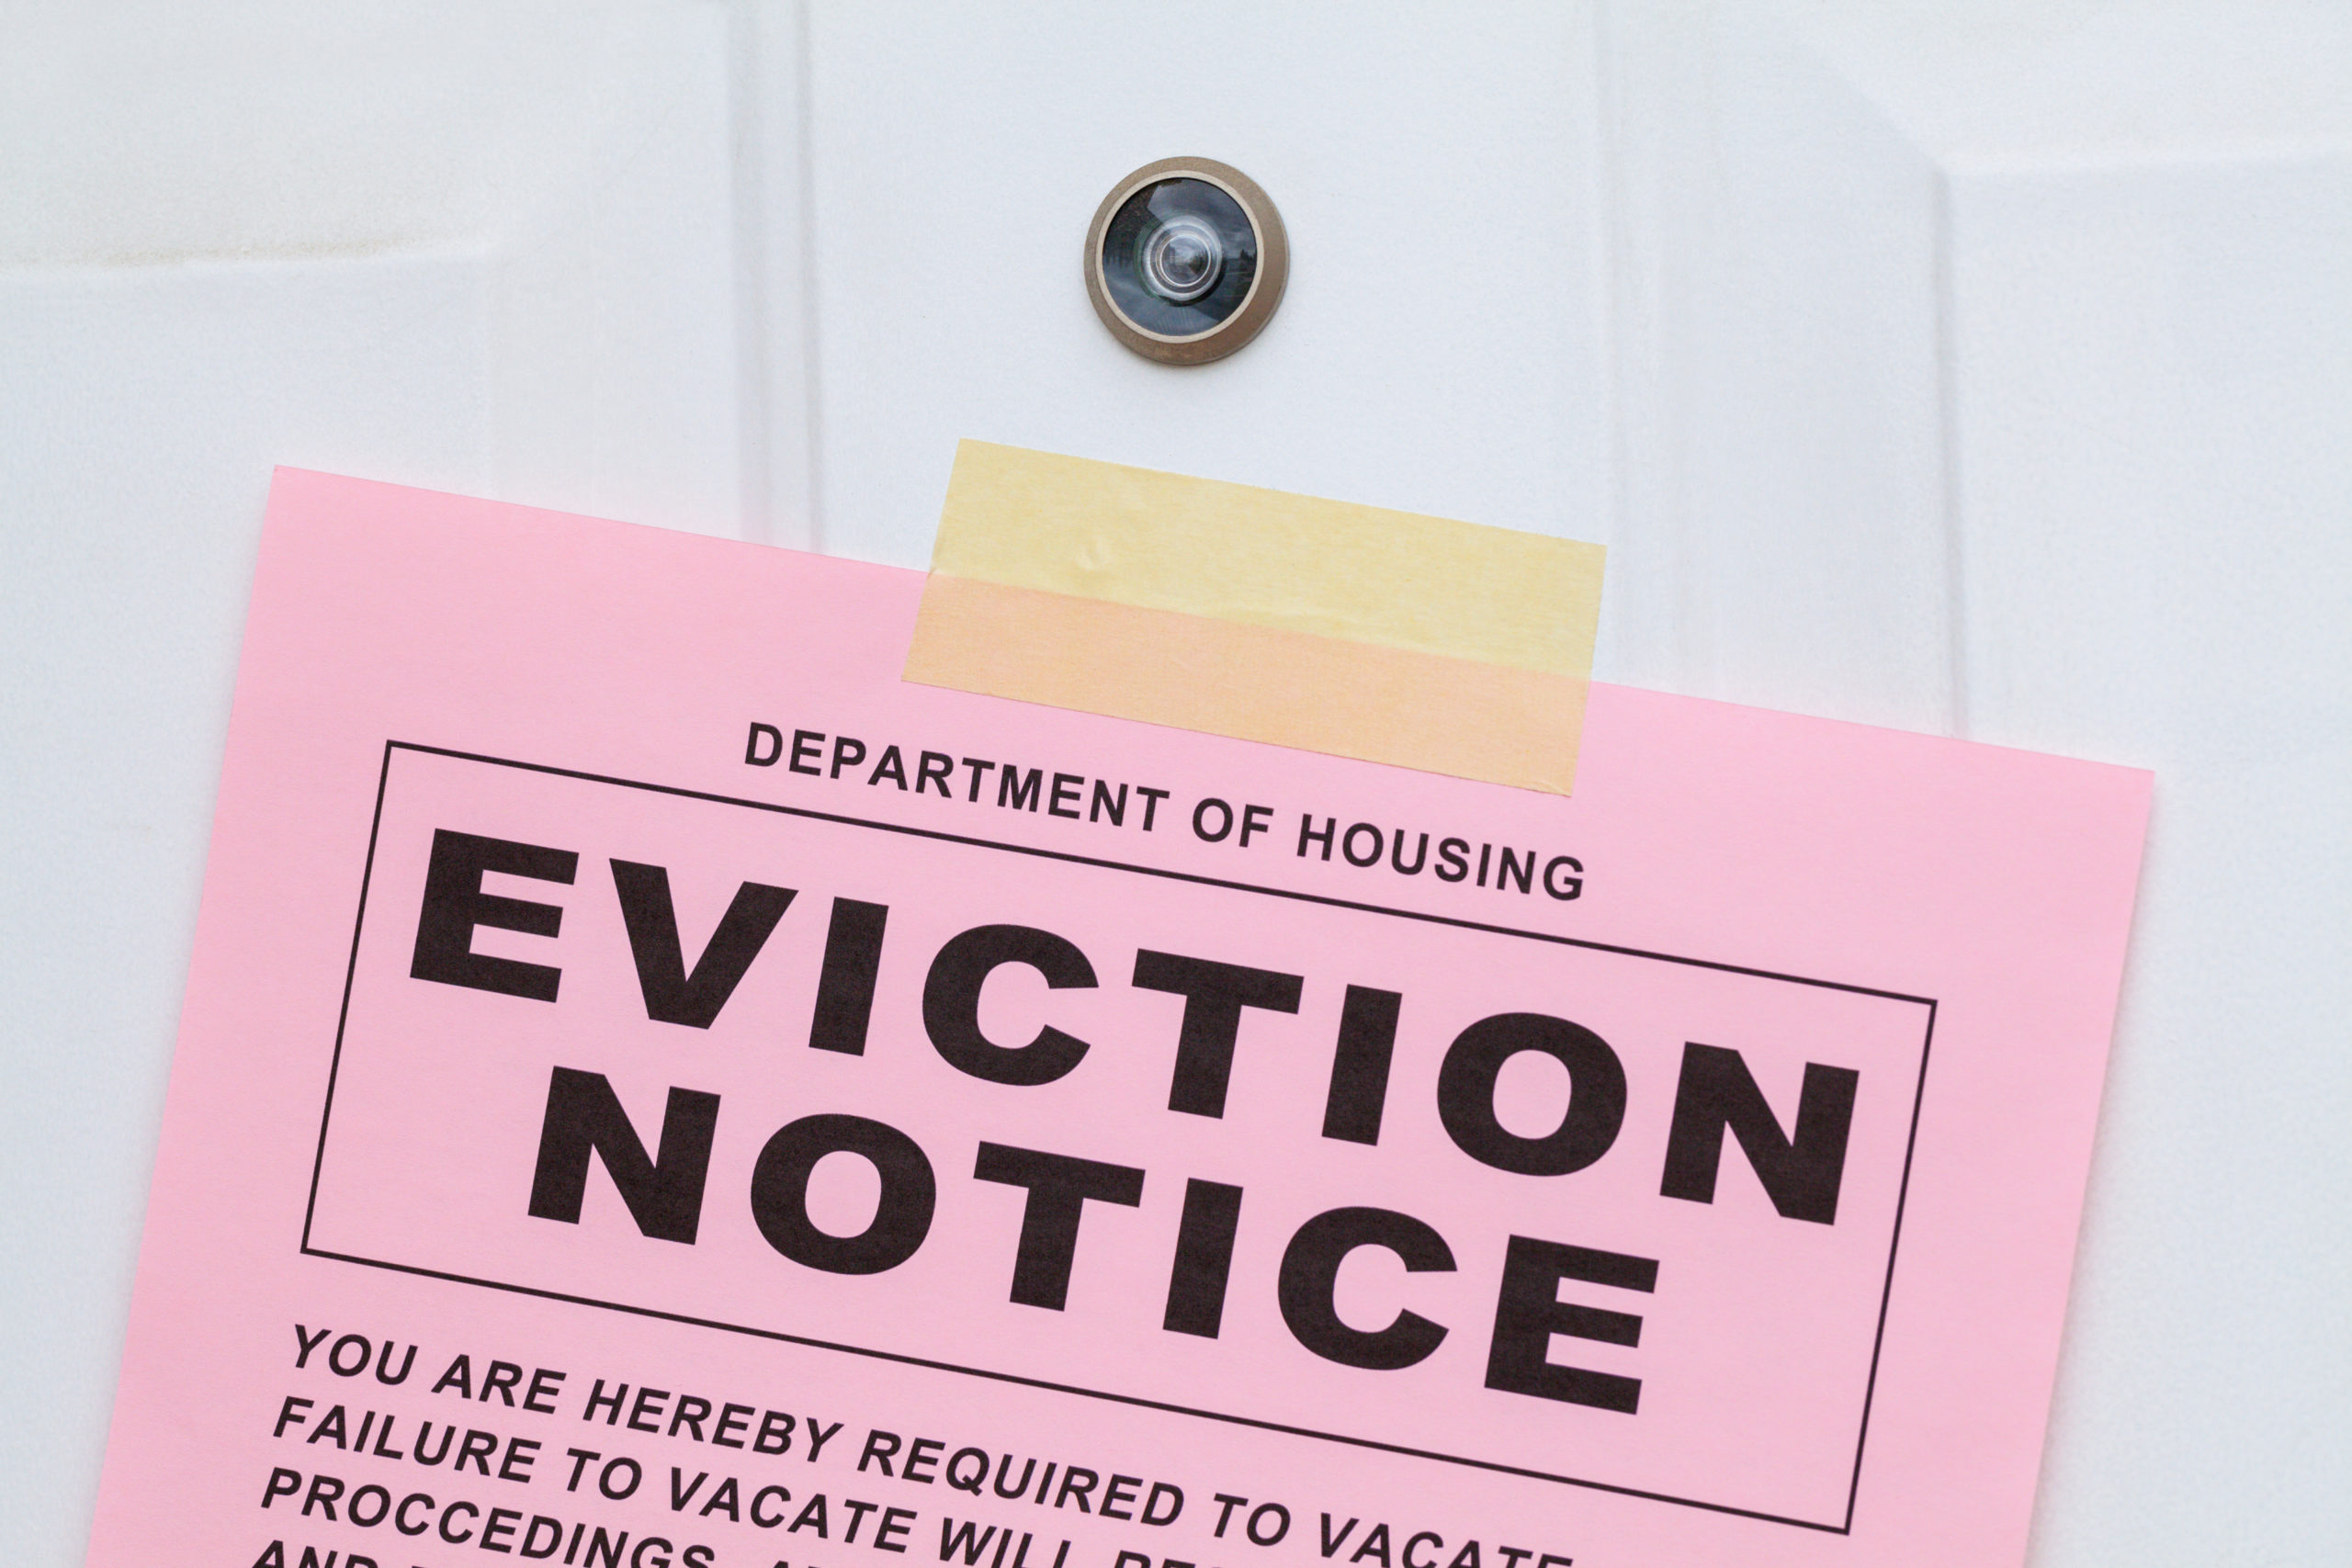 When you are facing eviction, how does this affect your credit score? Learn how an eviction can affect your scores.